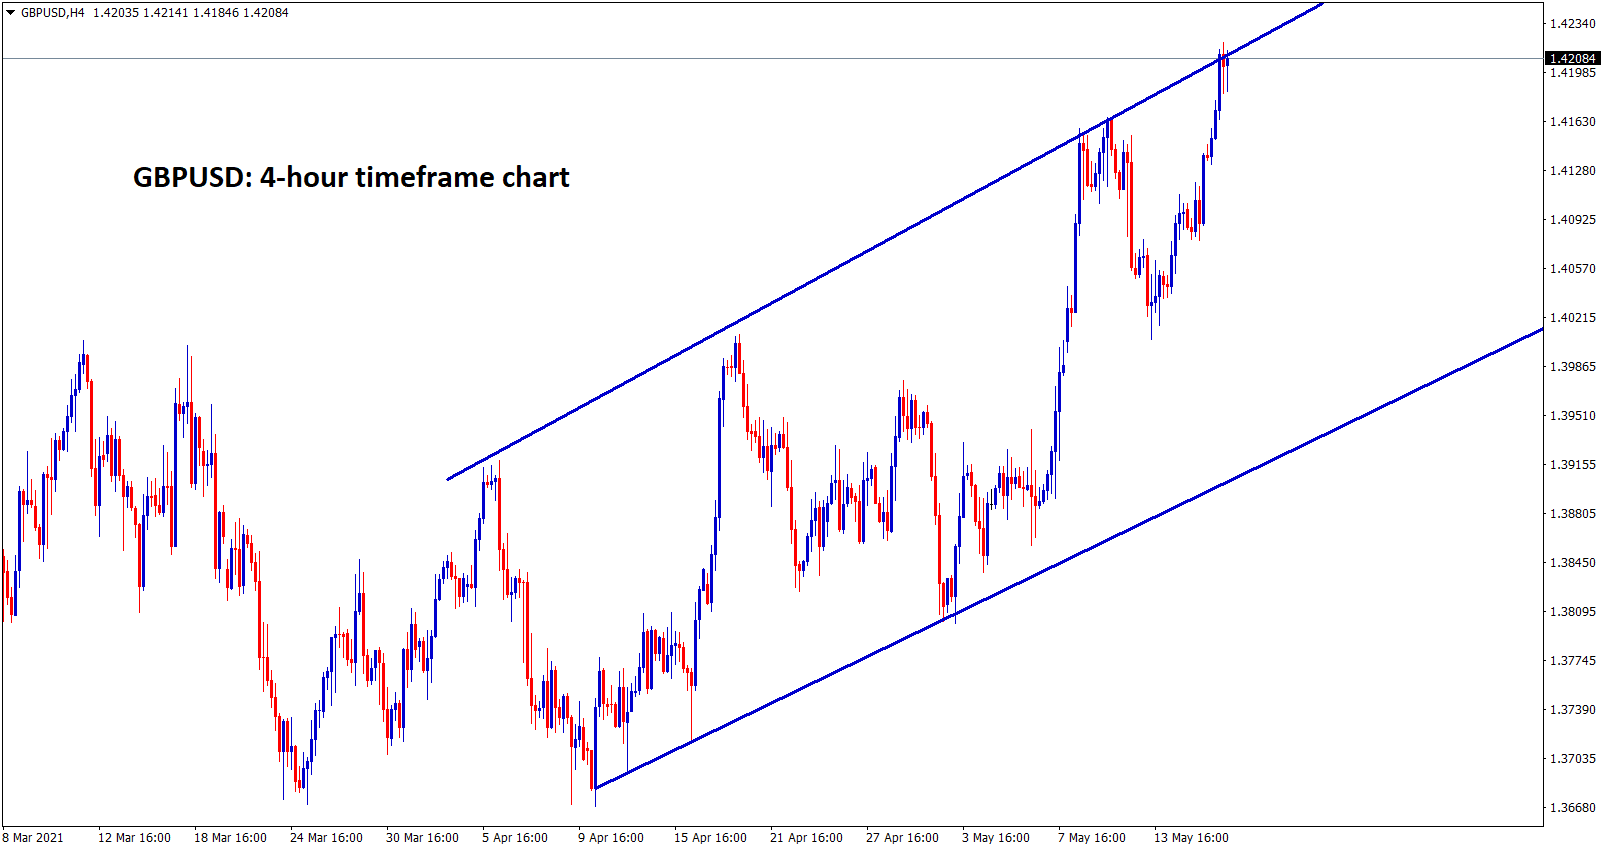 GBPUSD reaches the higher high zone of an Ascending channel.